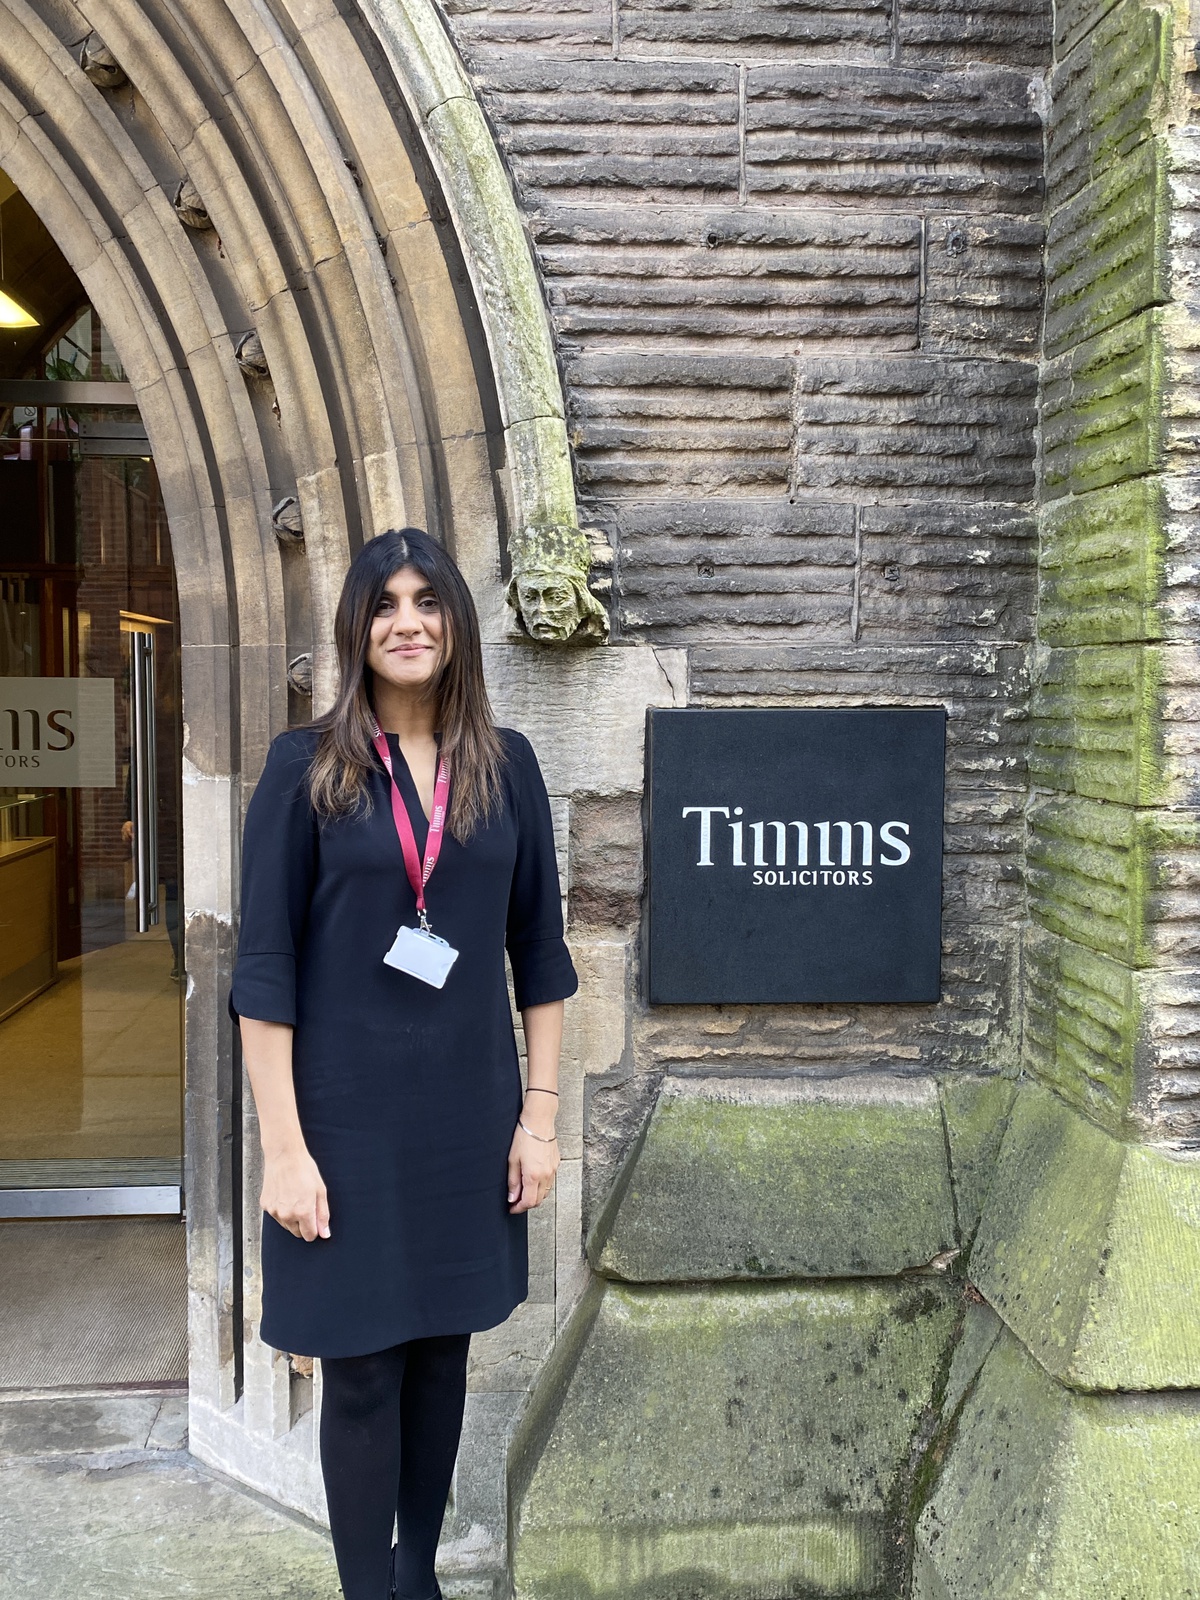 Timms announces new partner